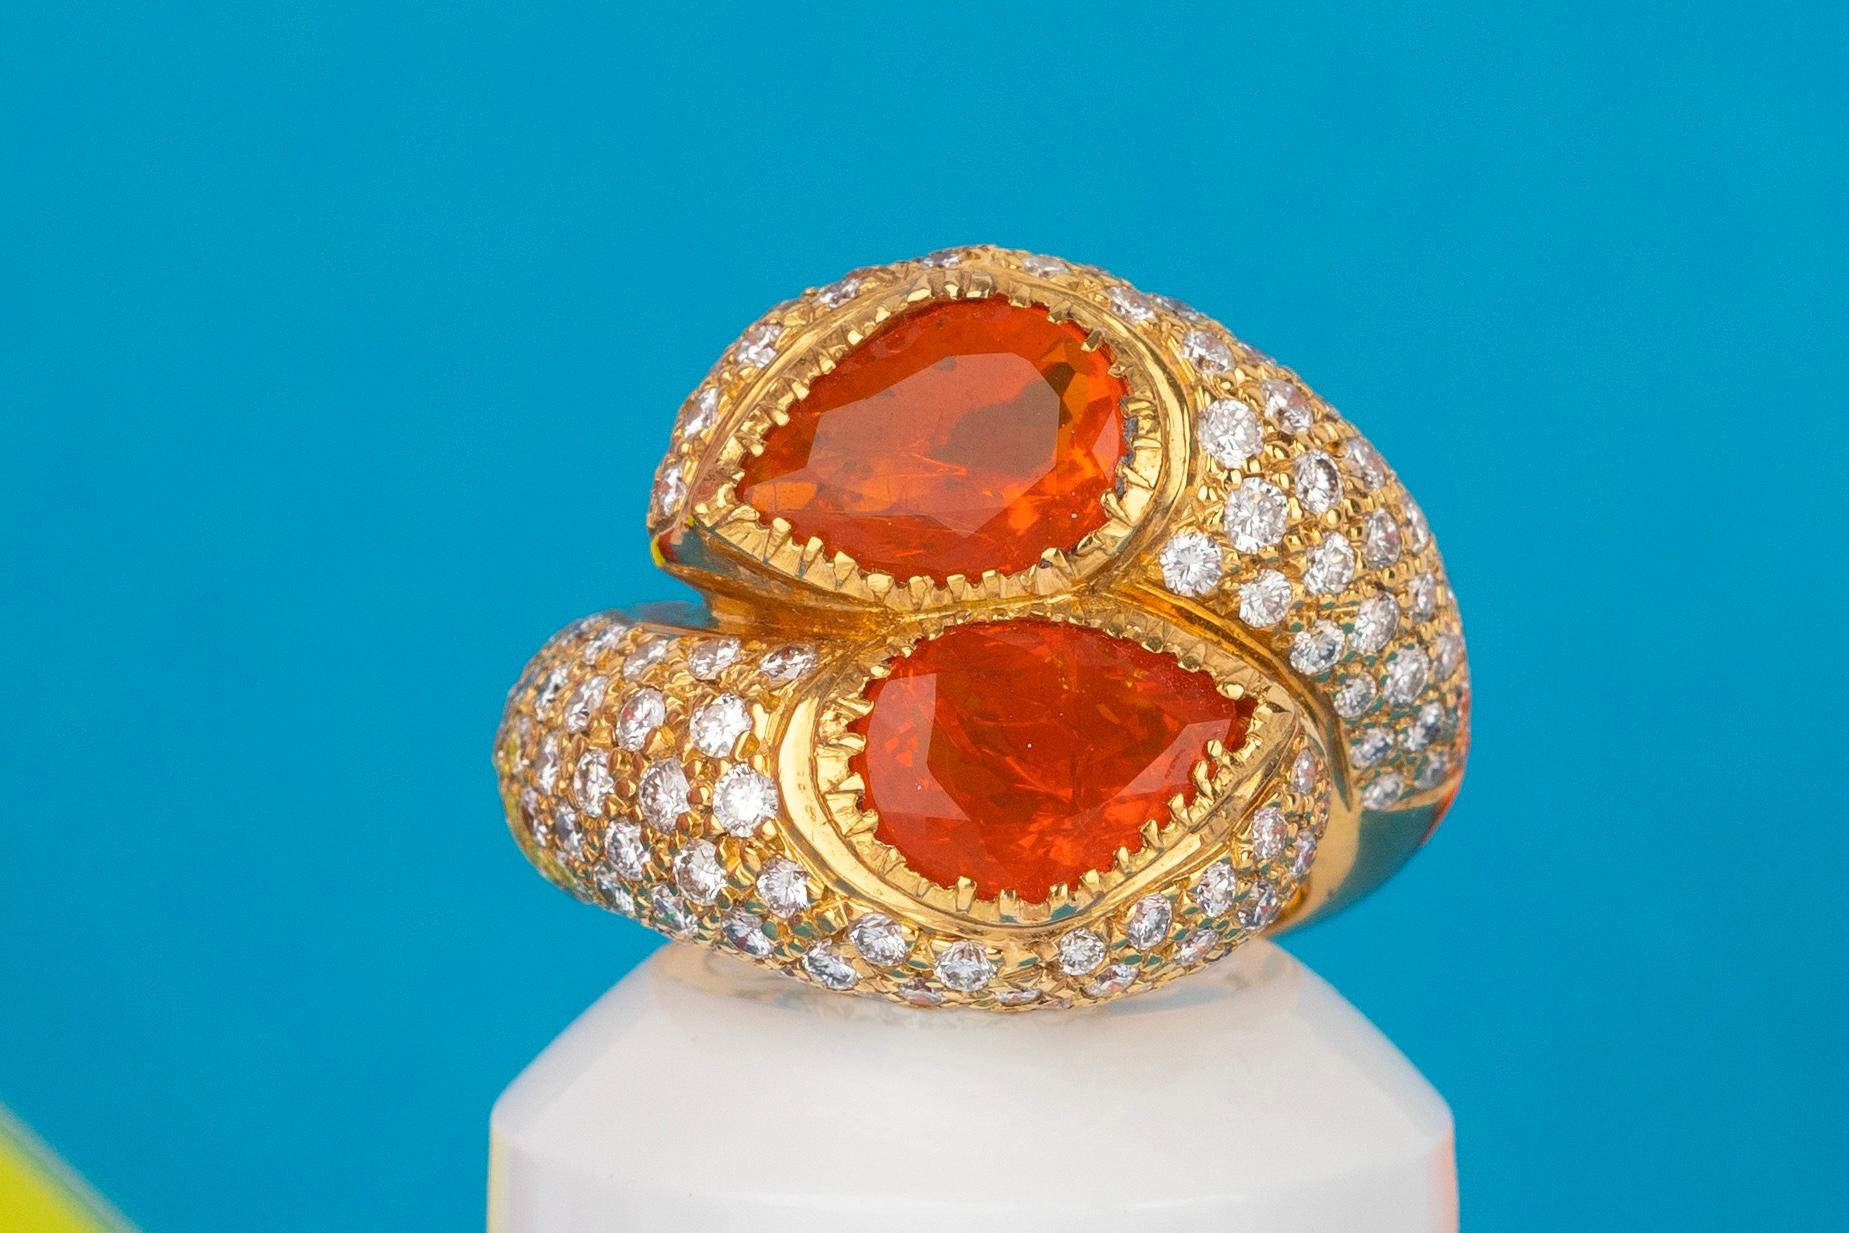 19.2K Yellow Gold Fire Opal and Diamond Ring, Consisting of two Stones With 2 Carats Each, Surrounded By Diamonds Brilliant Cut having Total Weight of 3,66 Carats.
Because of the inside of the sing the size is between:
USA Size 7.75
UK Size P